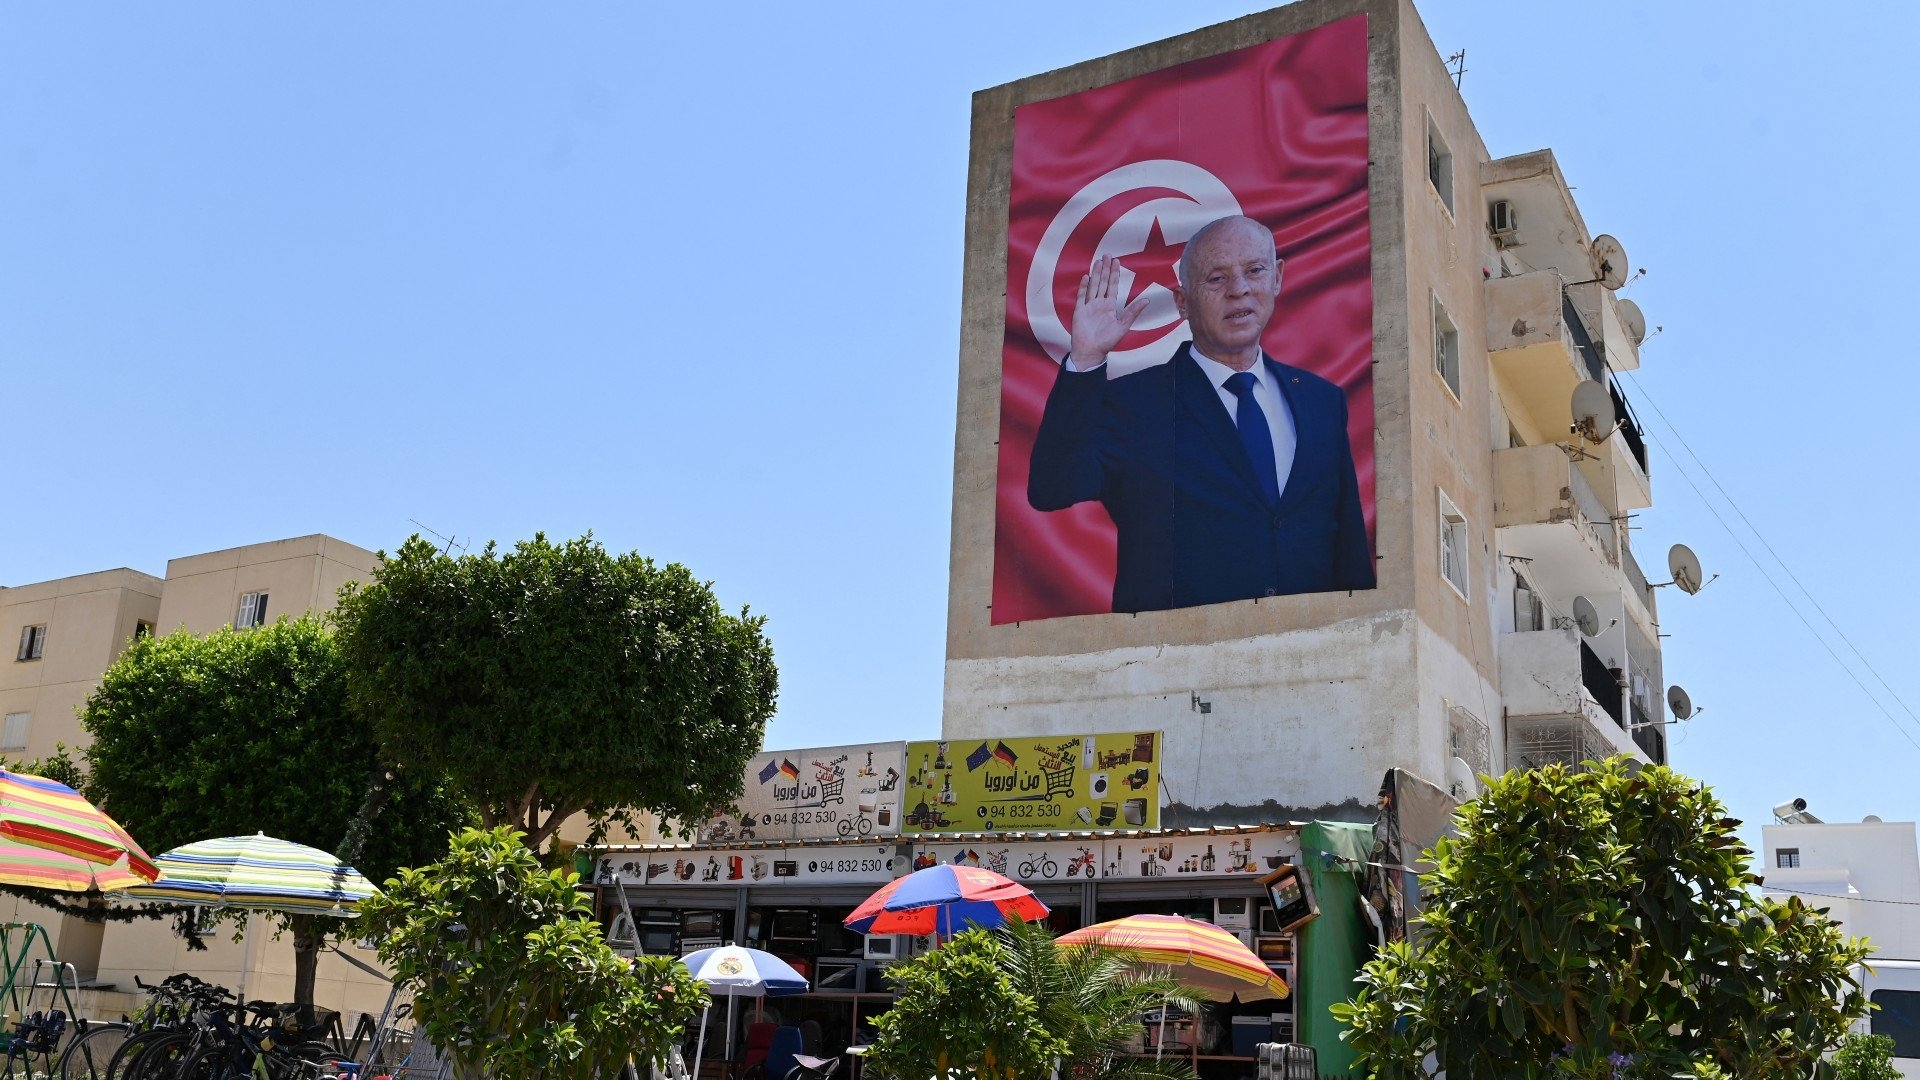 A billboard depicting Tunisia's Kais Saied hangs on the side of a building in the east-central city of Kairouan, on 26 July 2022 (AFP)